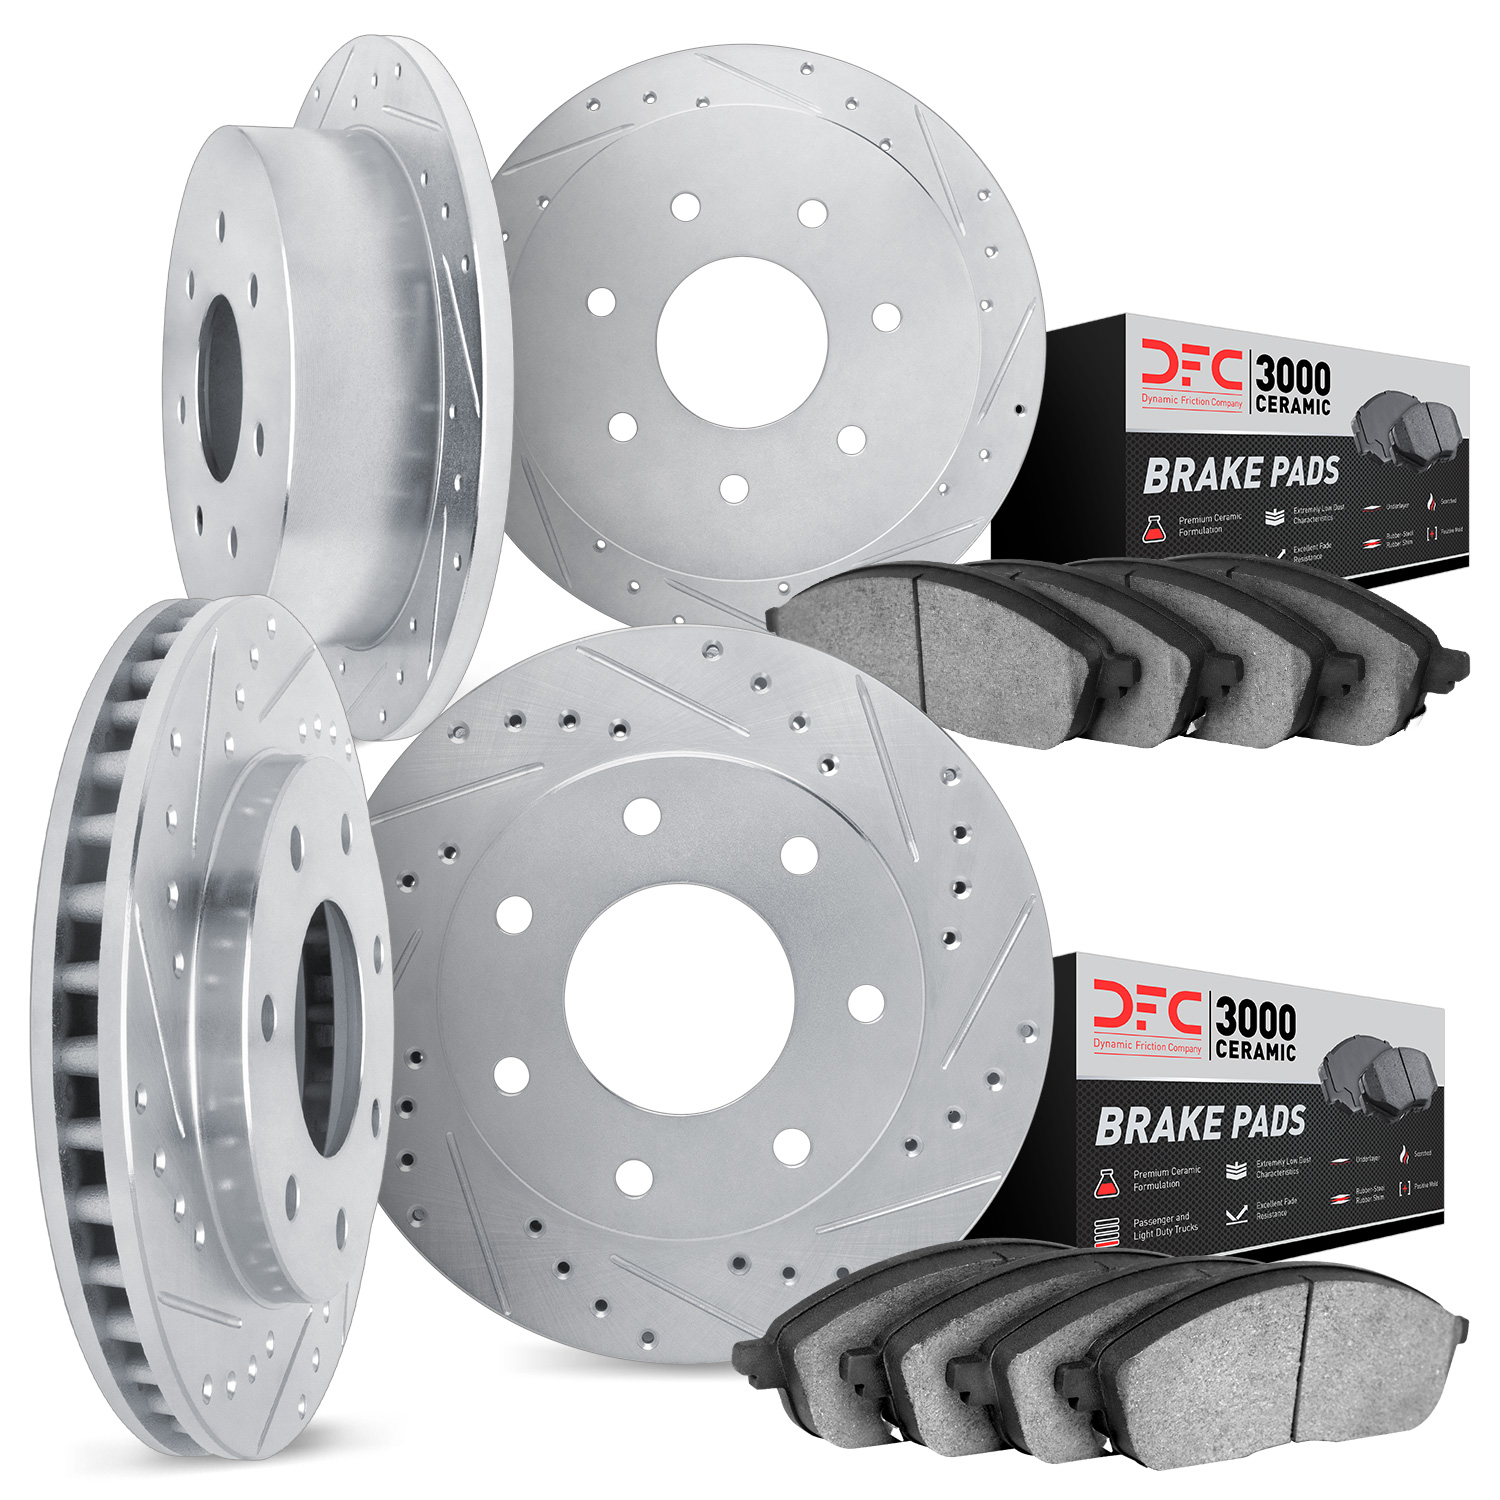 7304-54033 Drilled/Slotted Brake Rotor with 3000-Series Ceramic Brake Pads Kit [Silver], 1997-2004 Ford/Lincoln/Mercury/Mazda, P